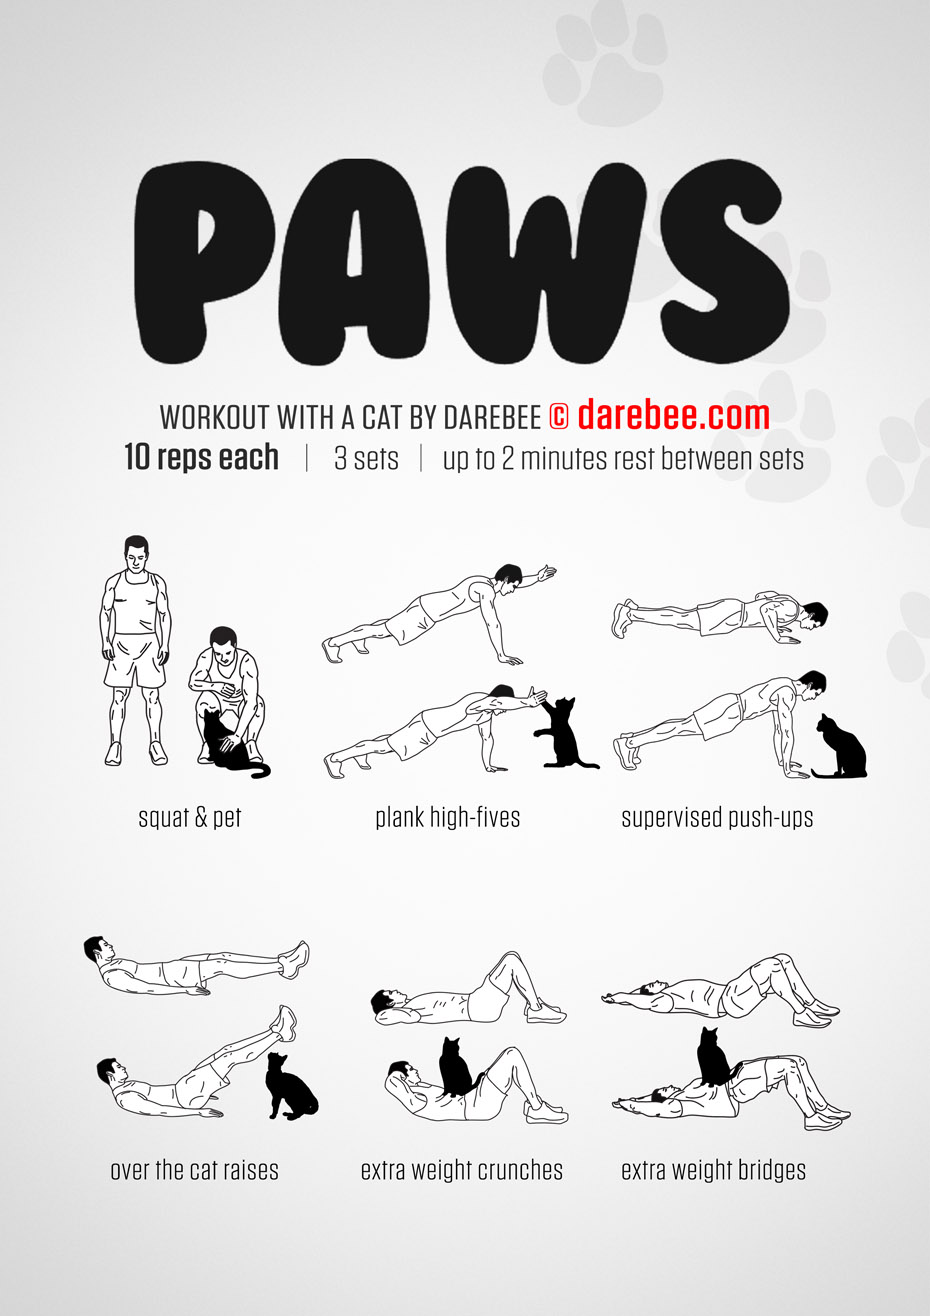 http://darebee.com/images/workouts/paws-workout.jpg